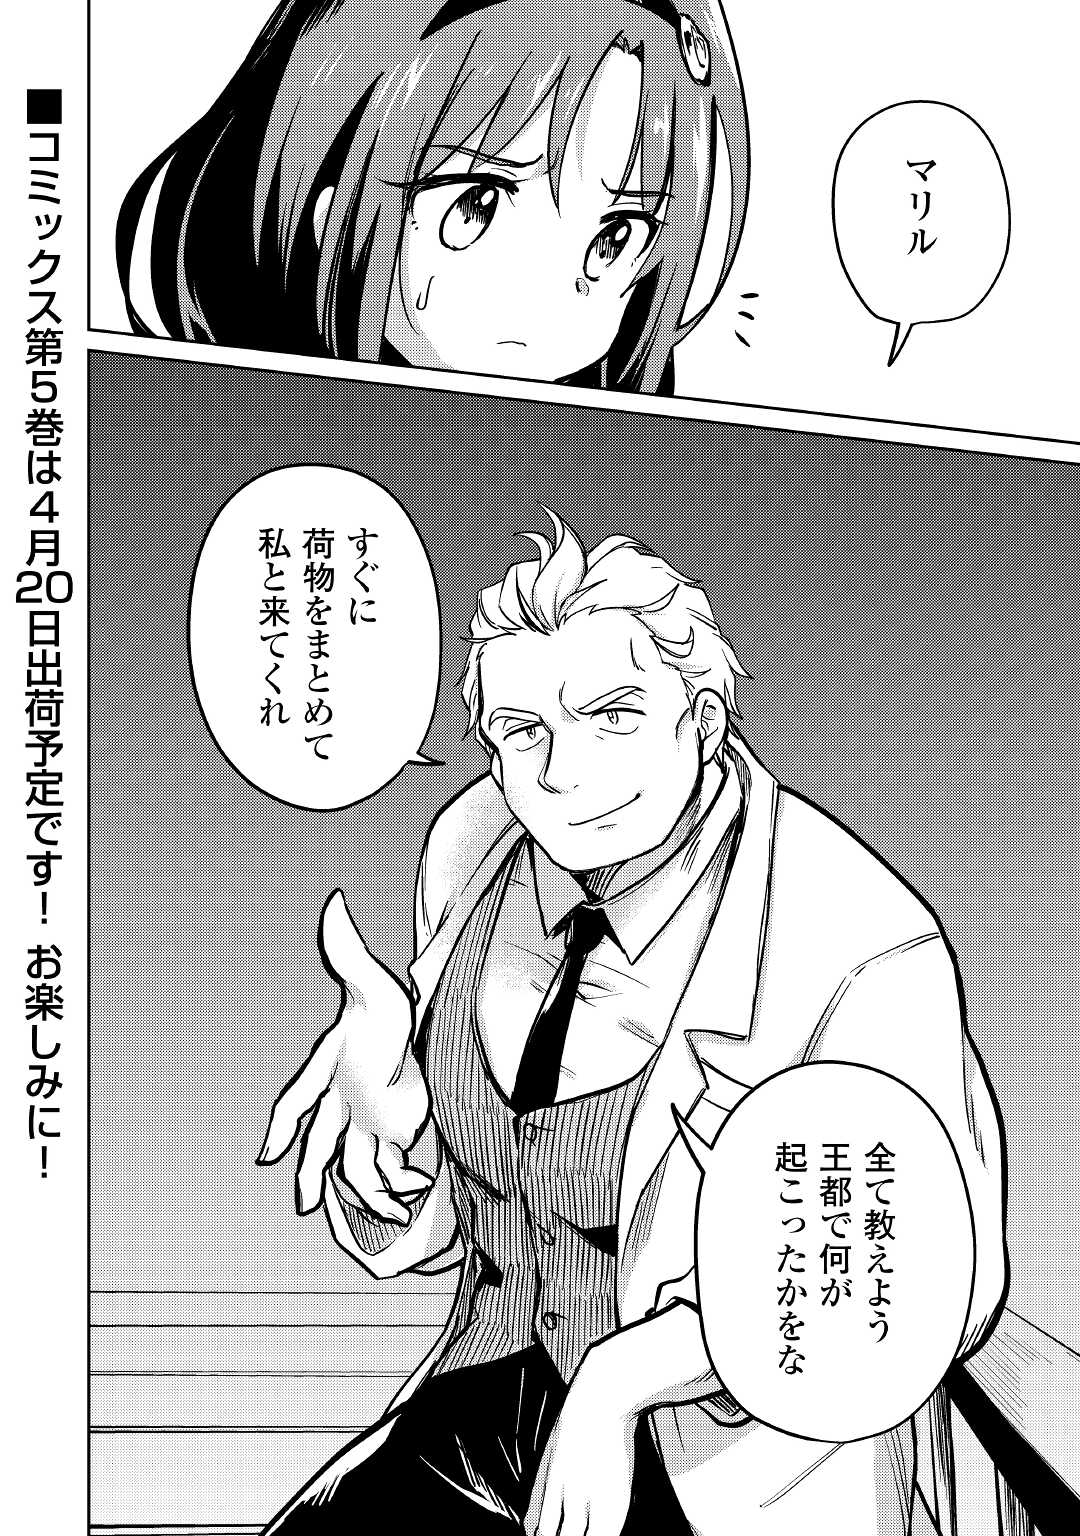 The Former Structural Researcher’s Story of Otherworldly Adventure 第35話 - Page 32